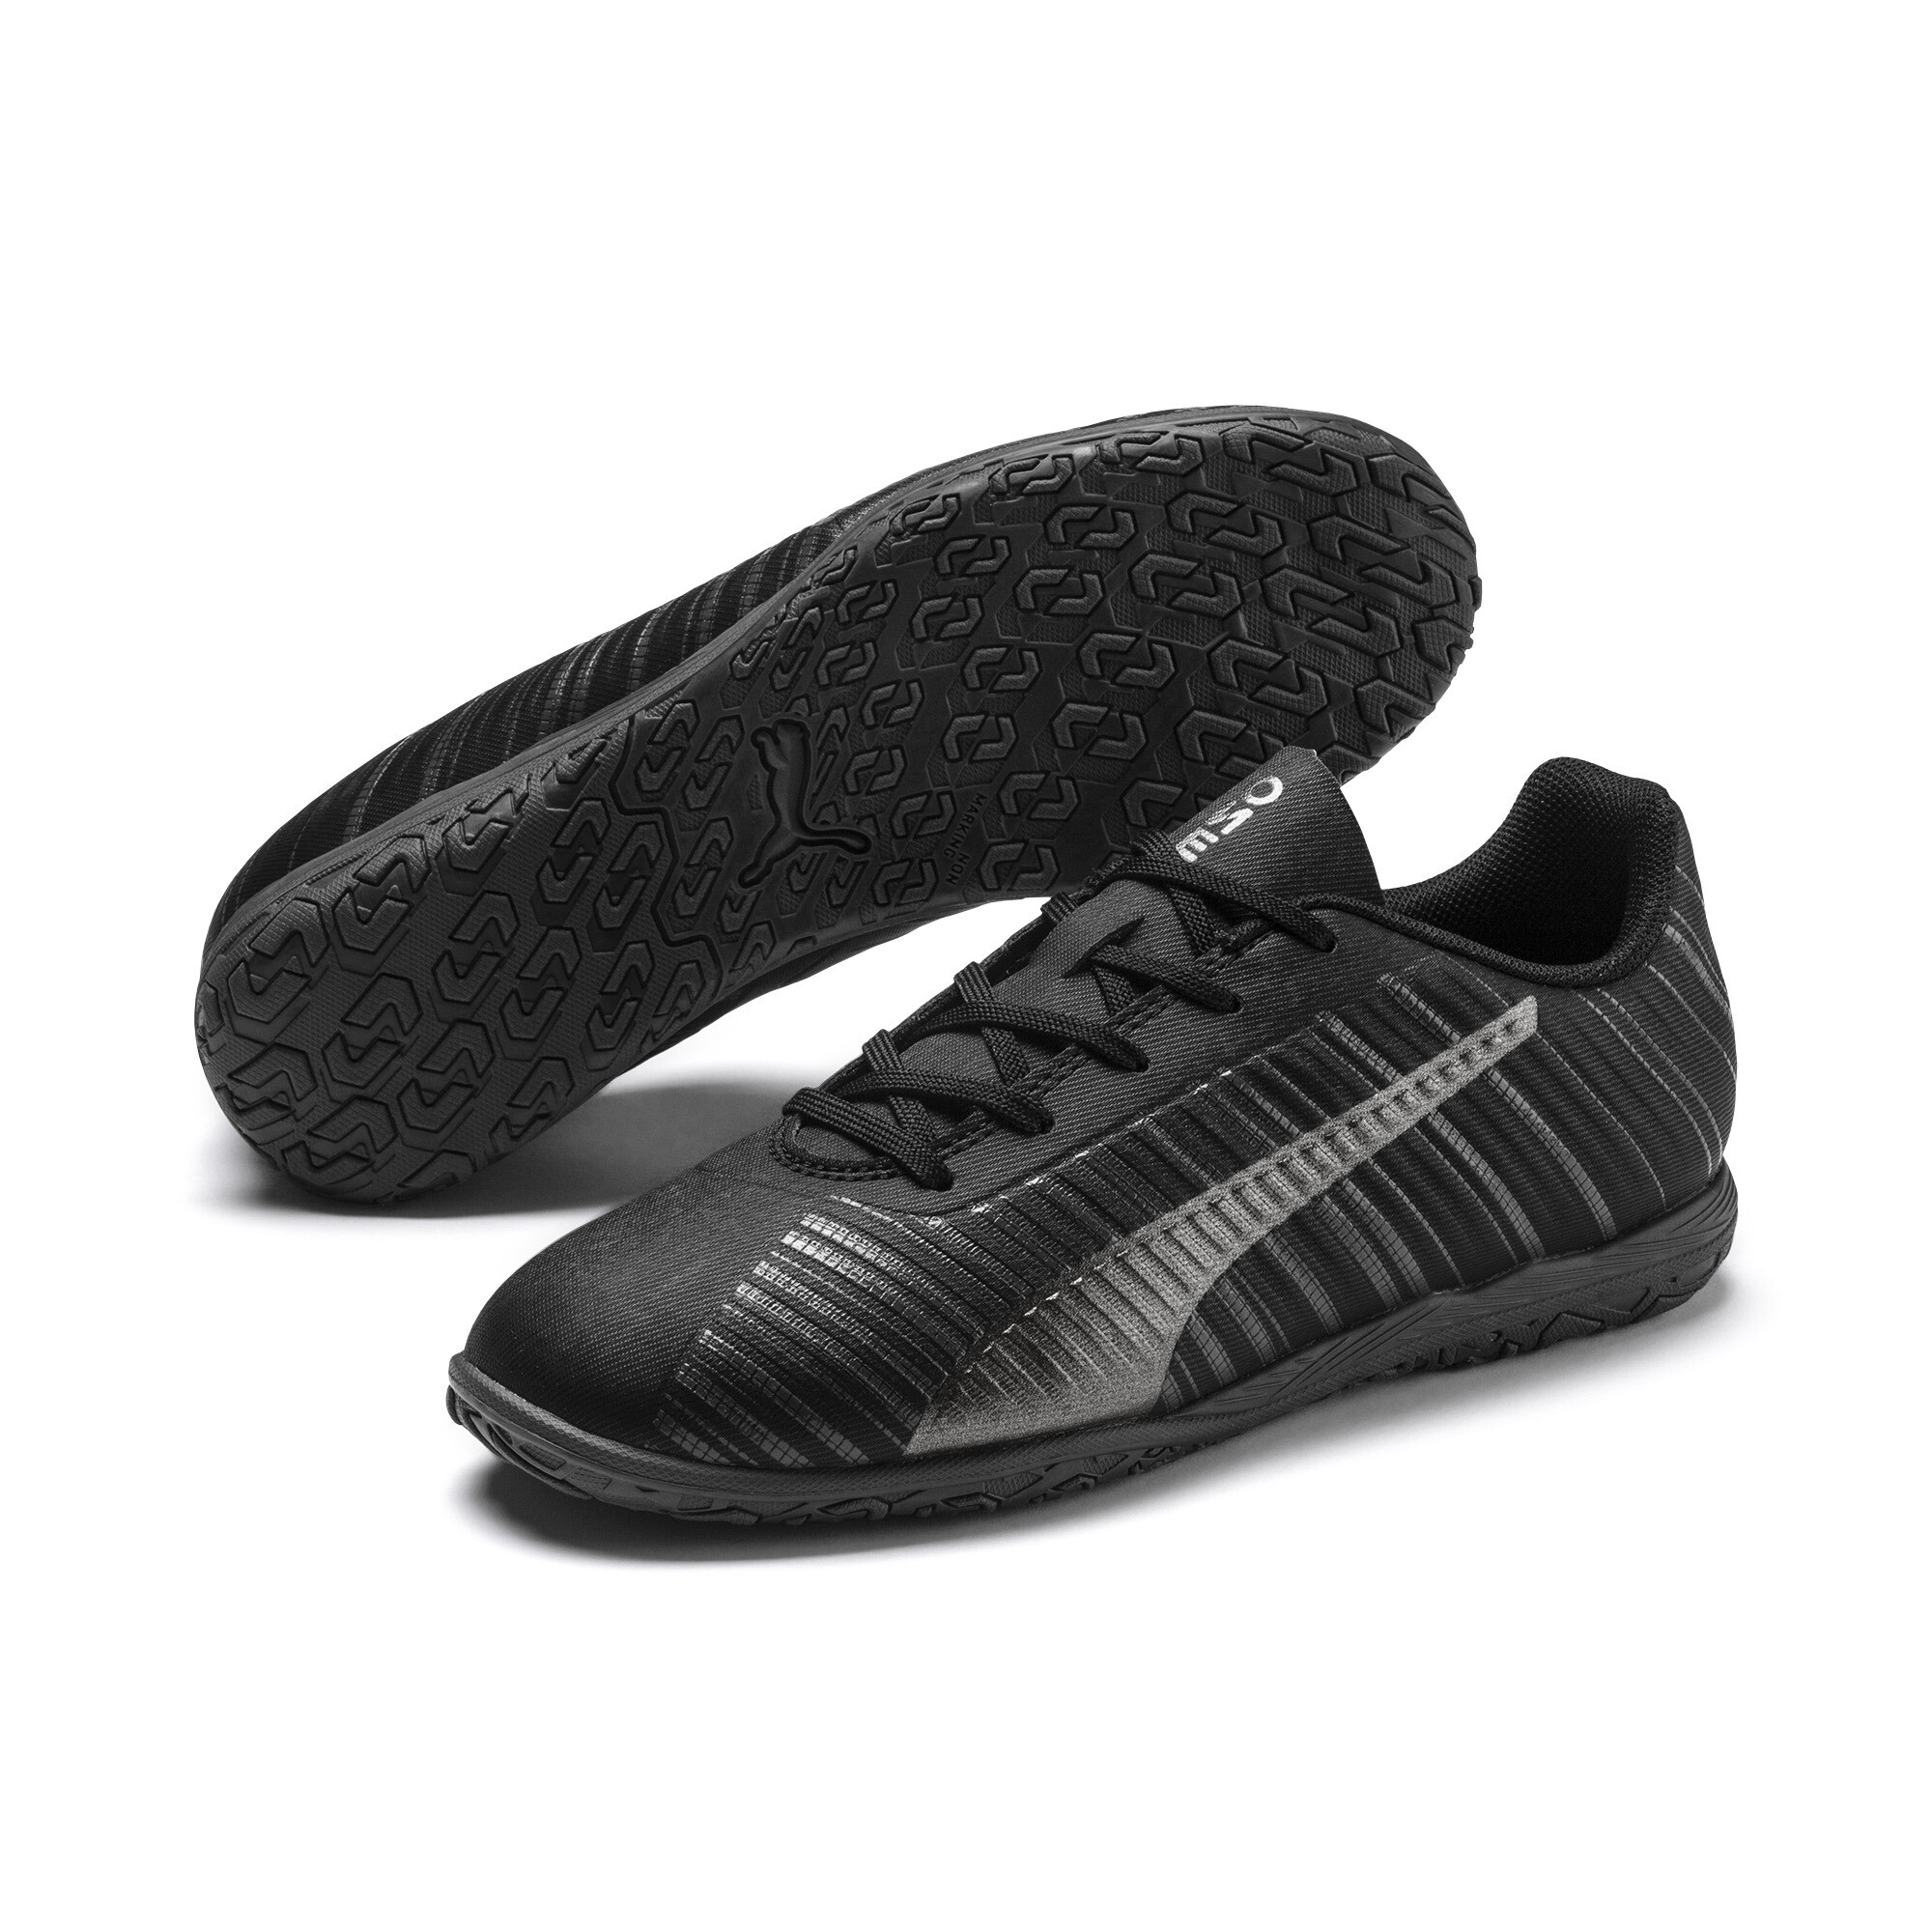 Puma ONE 5.4 IT Youth Football Boots, Black, Size 35, Shoes